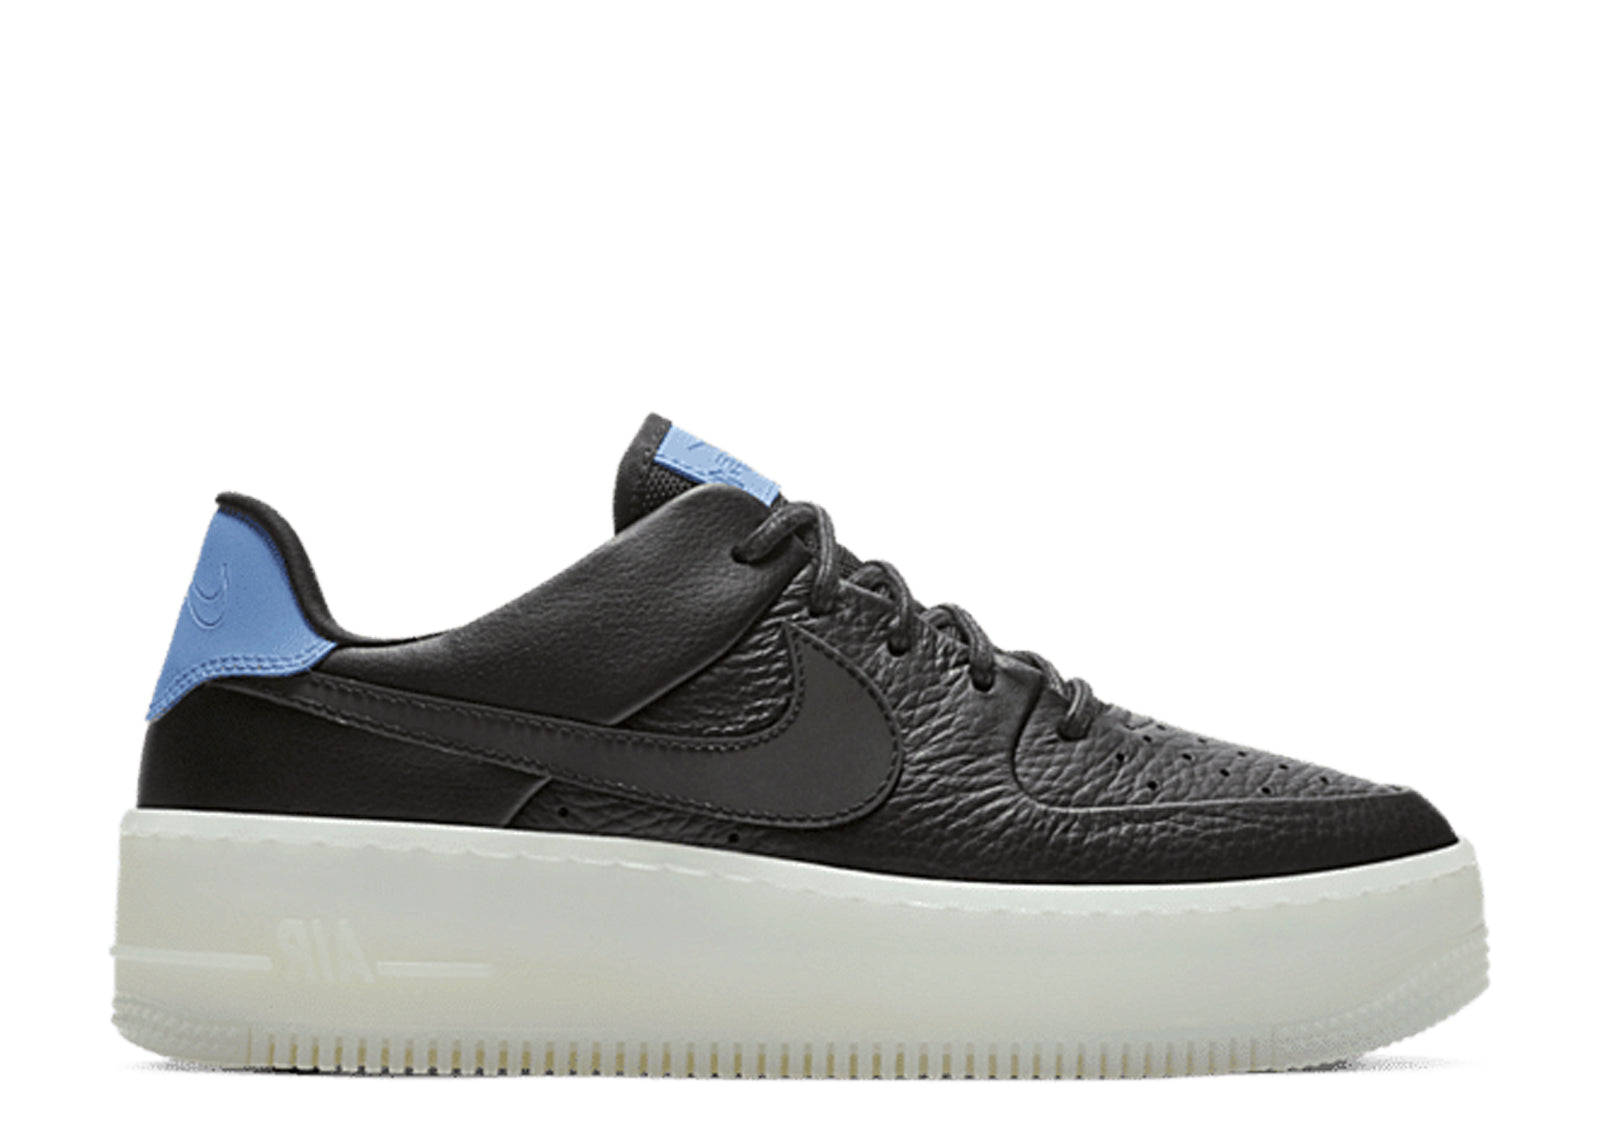 Second Chance - sail nike Air Force 1 Sage Low Black/Glace - 37,5 | NEW